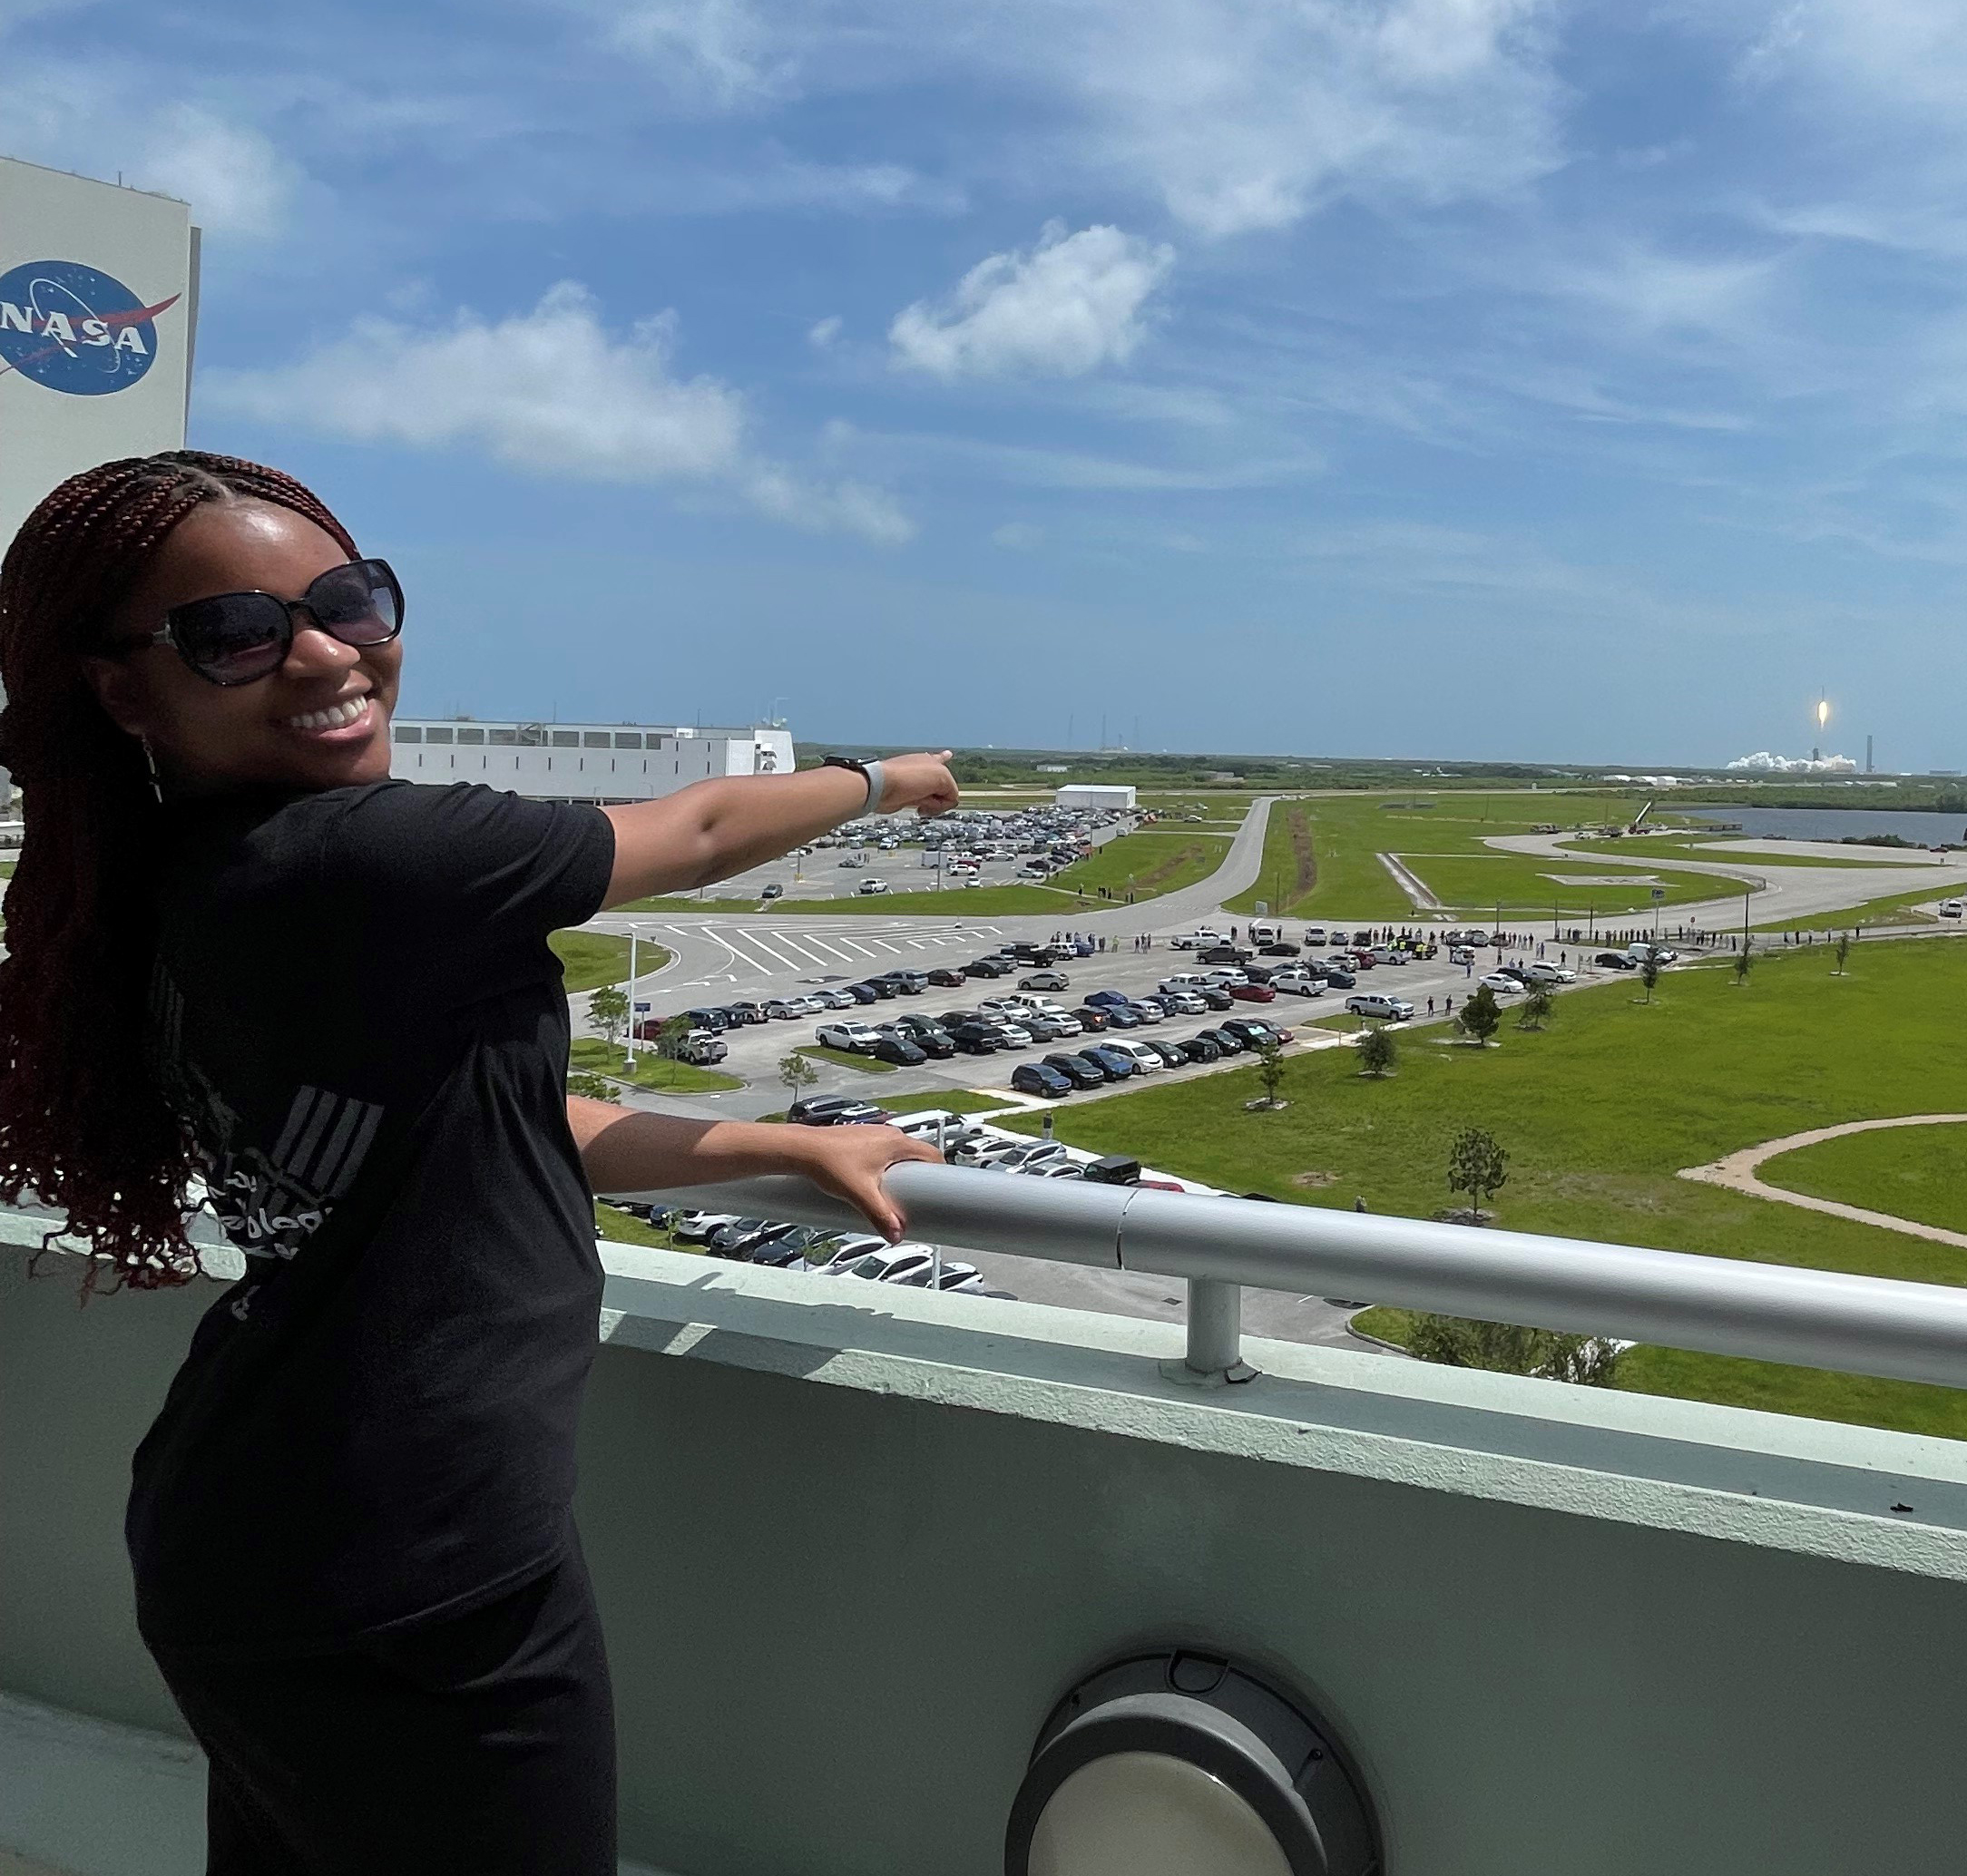 Houston We Have a Podcast: Ep. 292: Students and Space Genes Pristine Onuoha, the Genes in Space-10 winner, watches the SpaceX cargo Dragon launch that will carry her experiment to the space station.